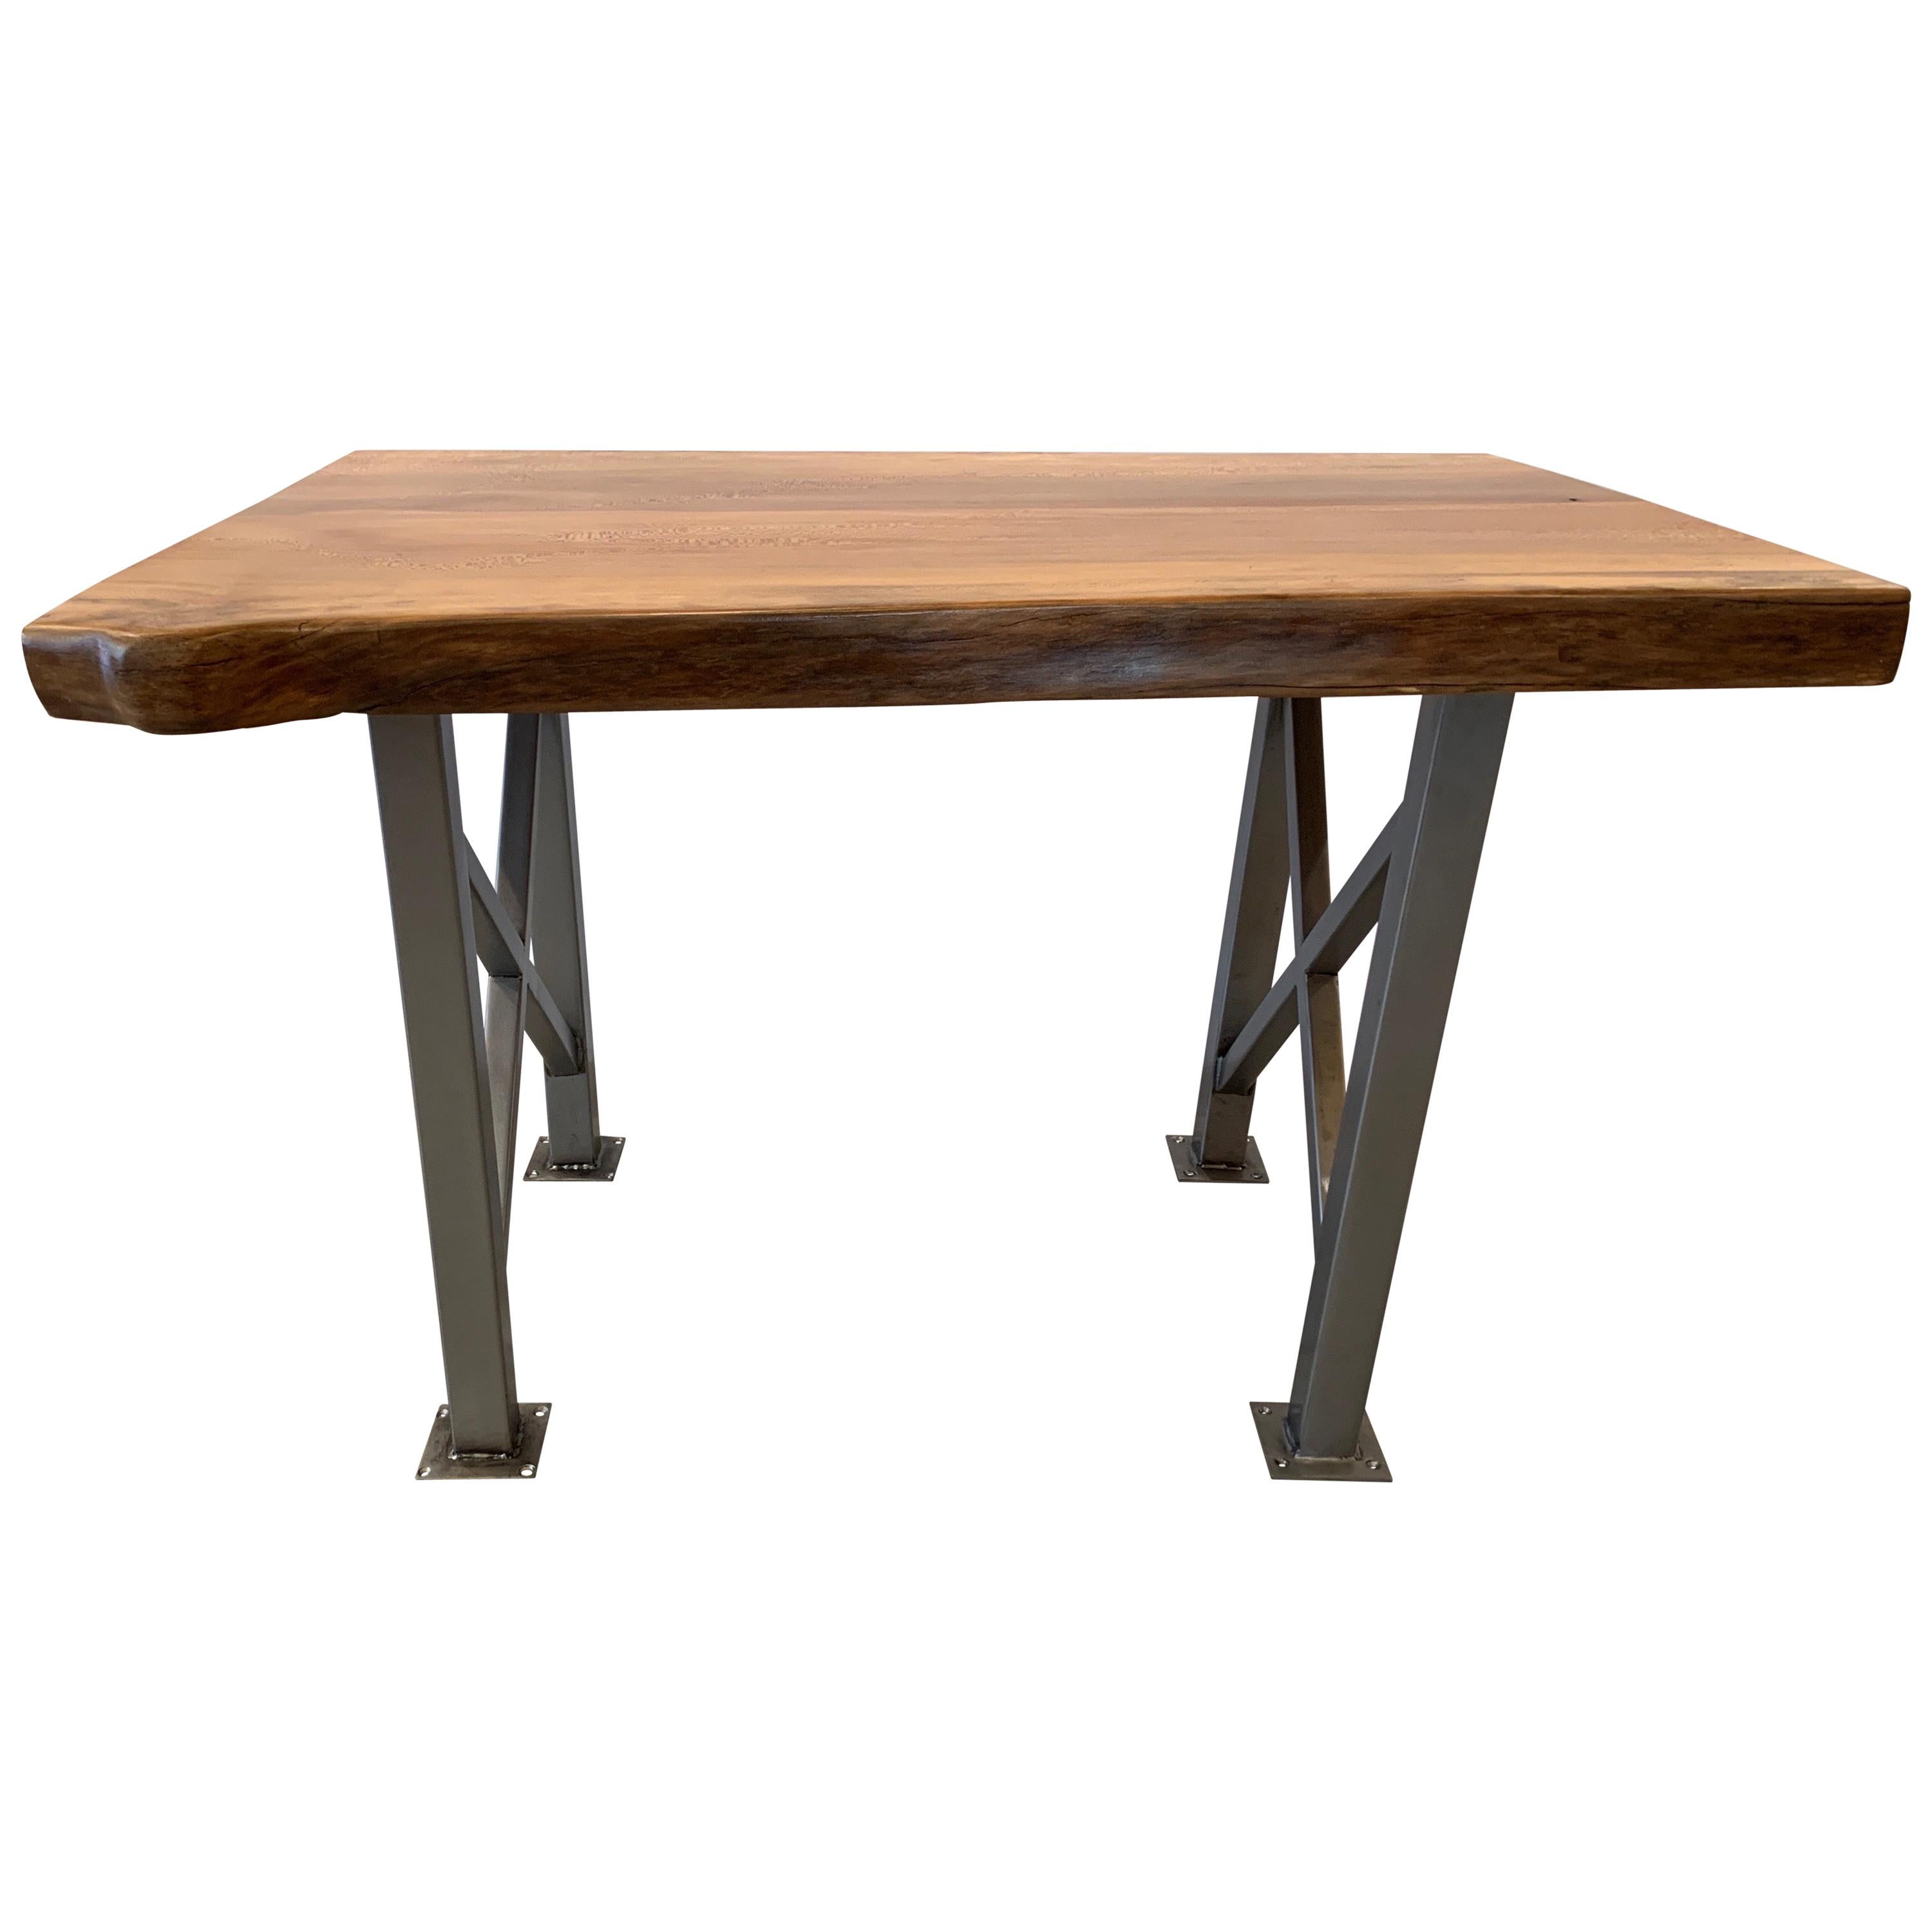 Maple Freeform Table with Industrial Steel Base For Sale